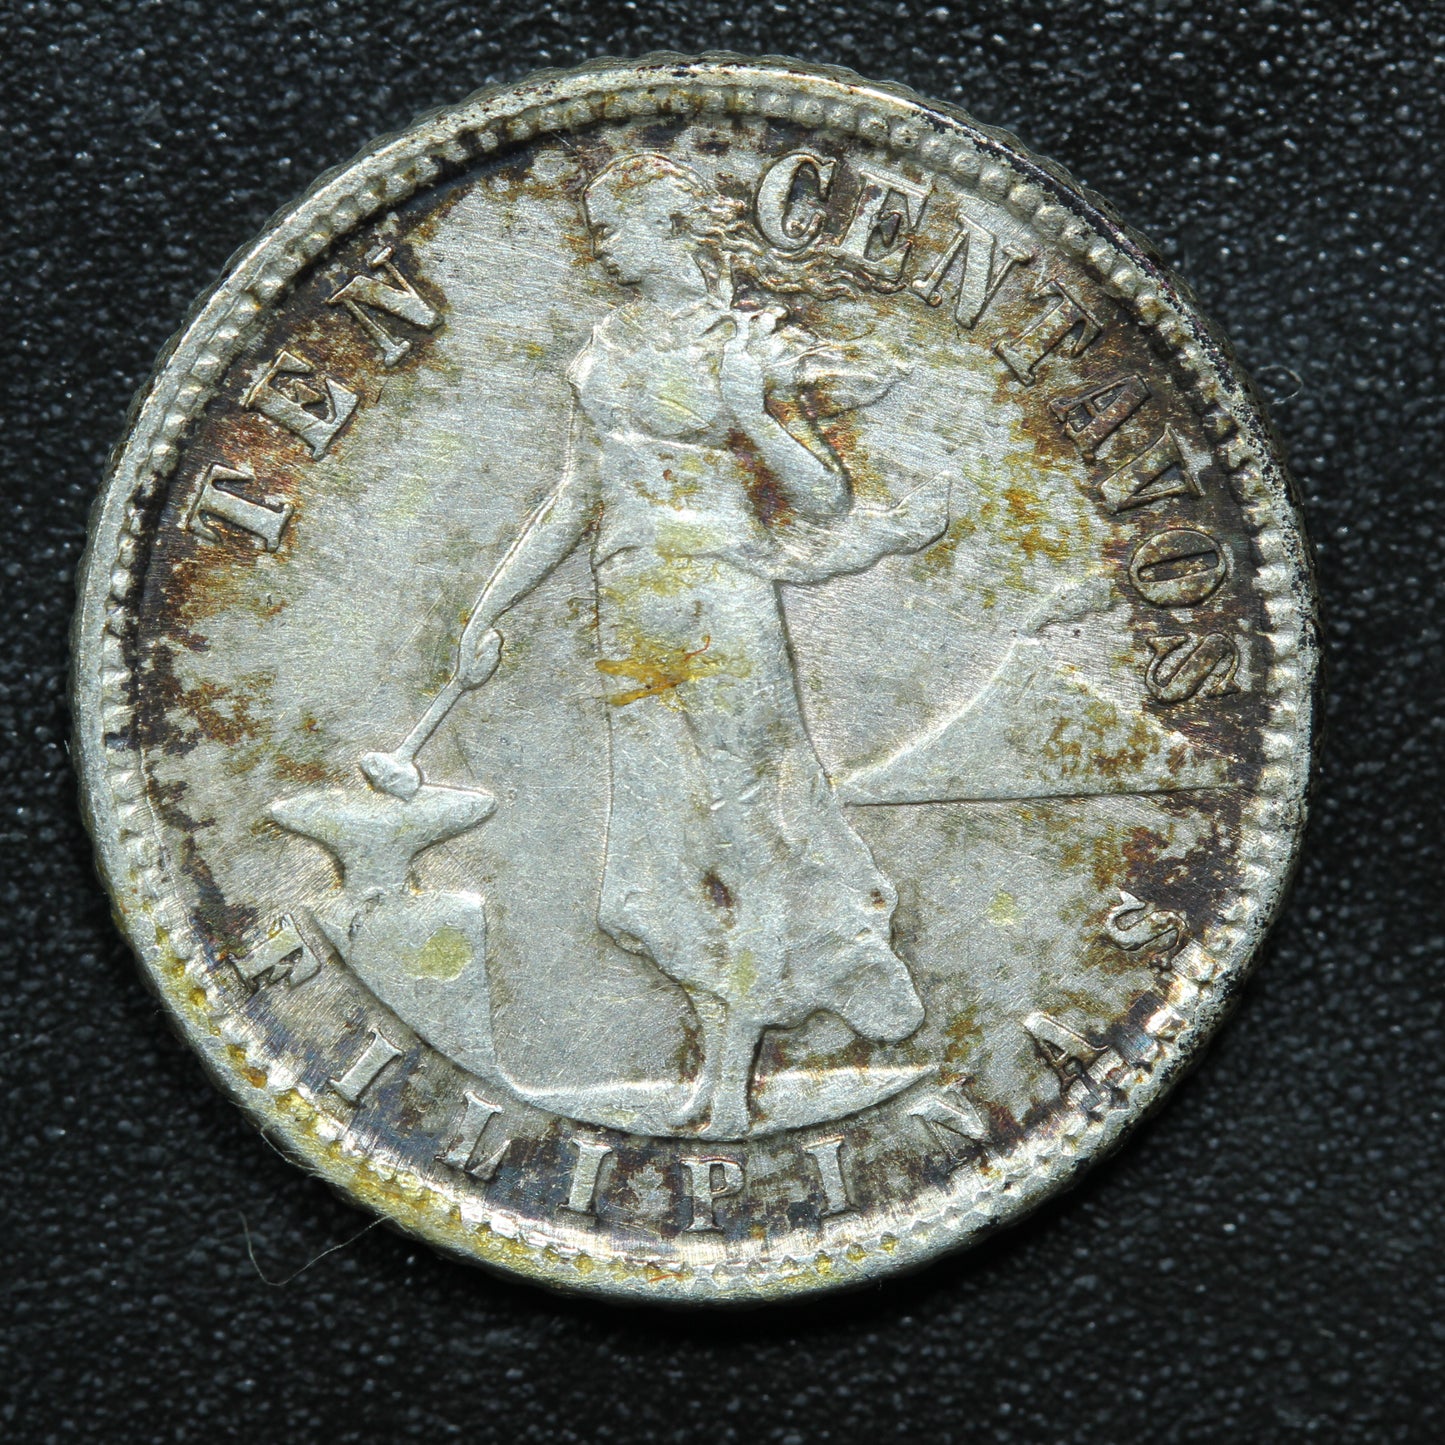 1945 D 10 Centavos Philippines Silver Coin.  75% Silver Coinage